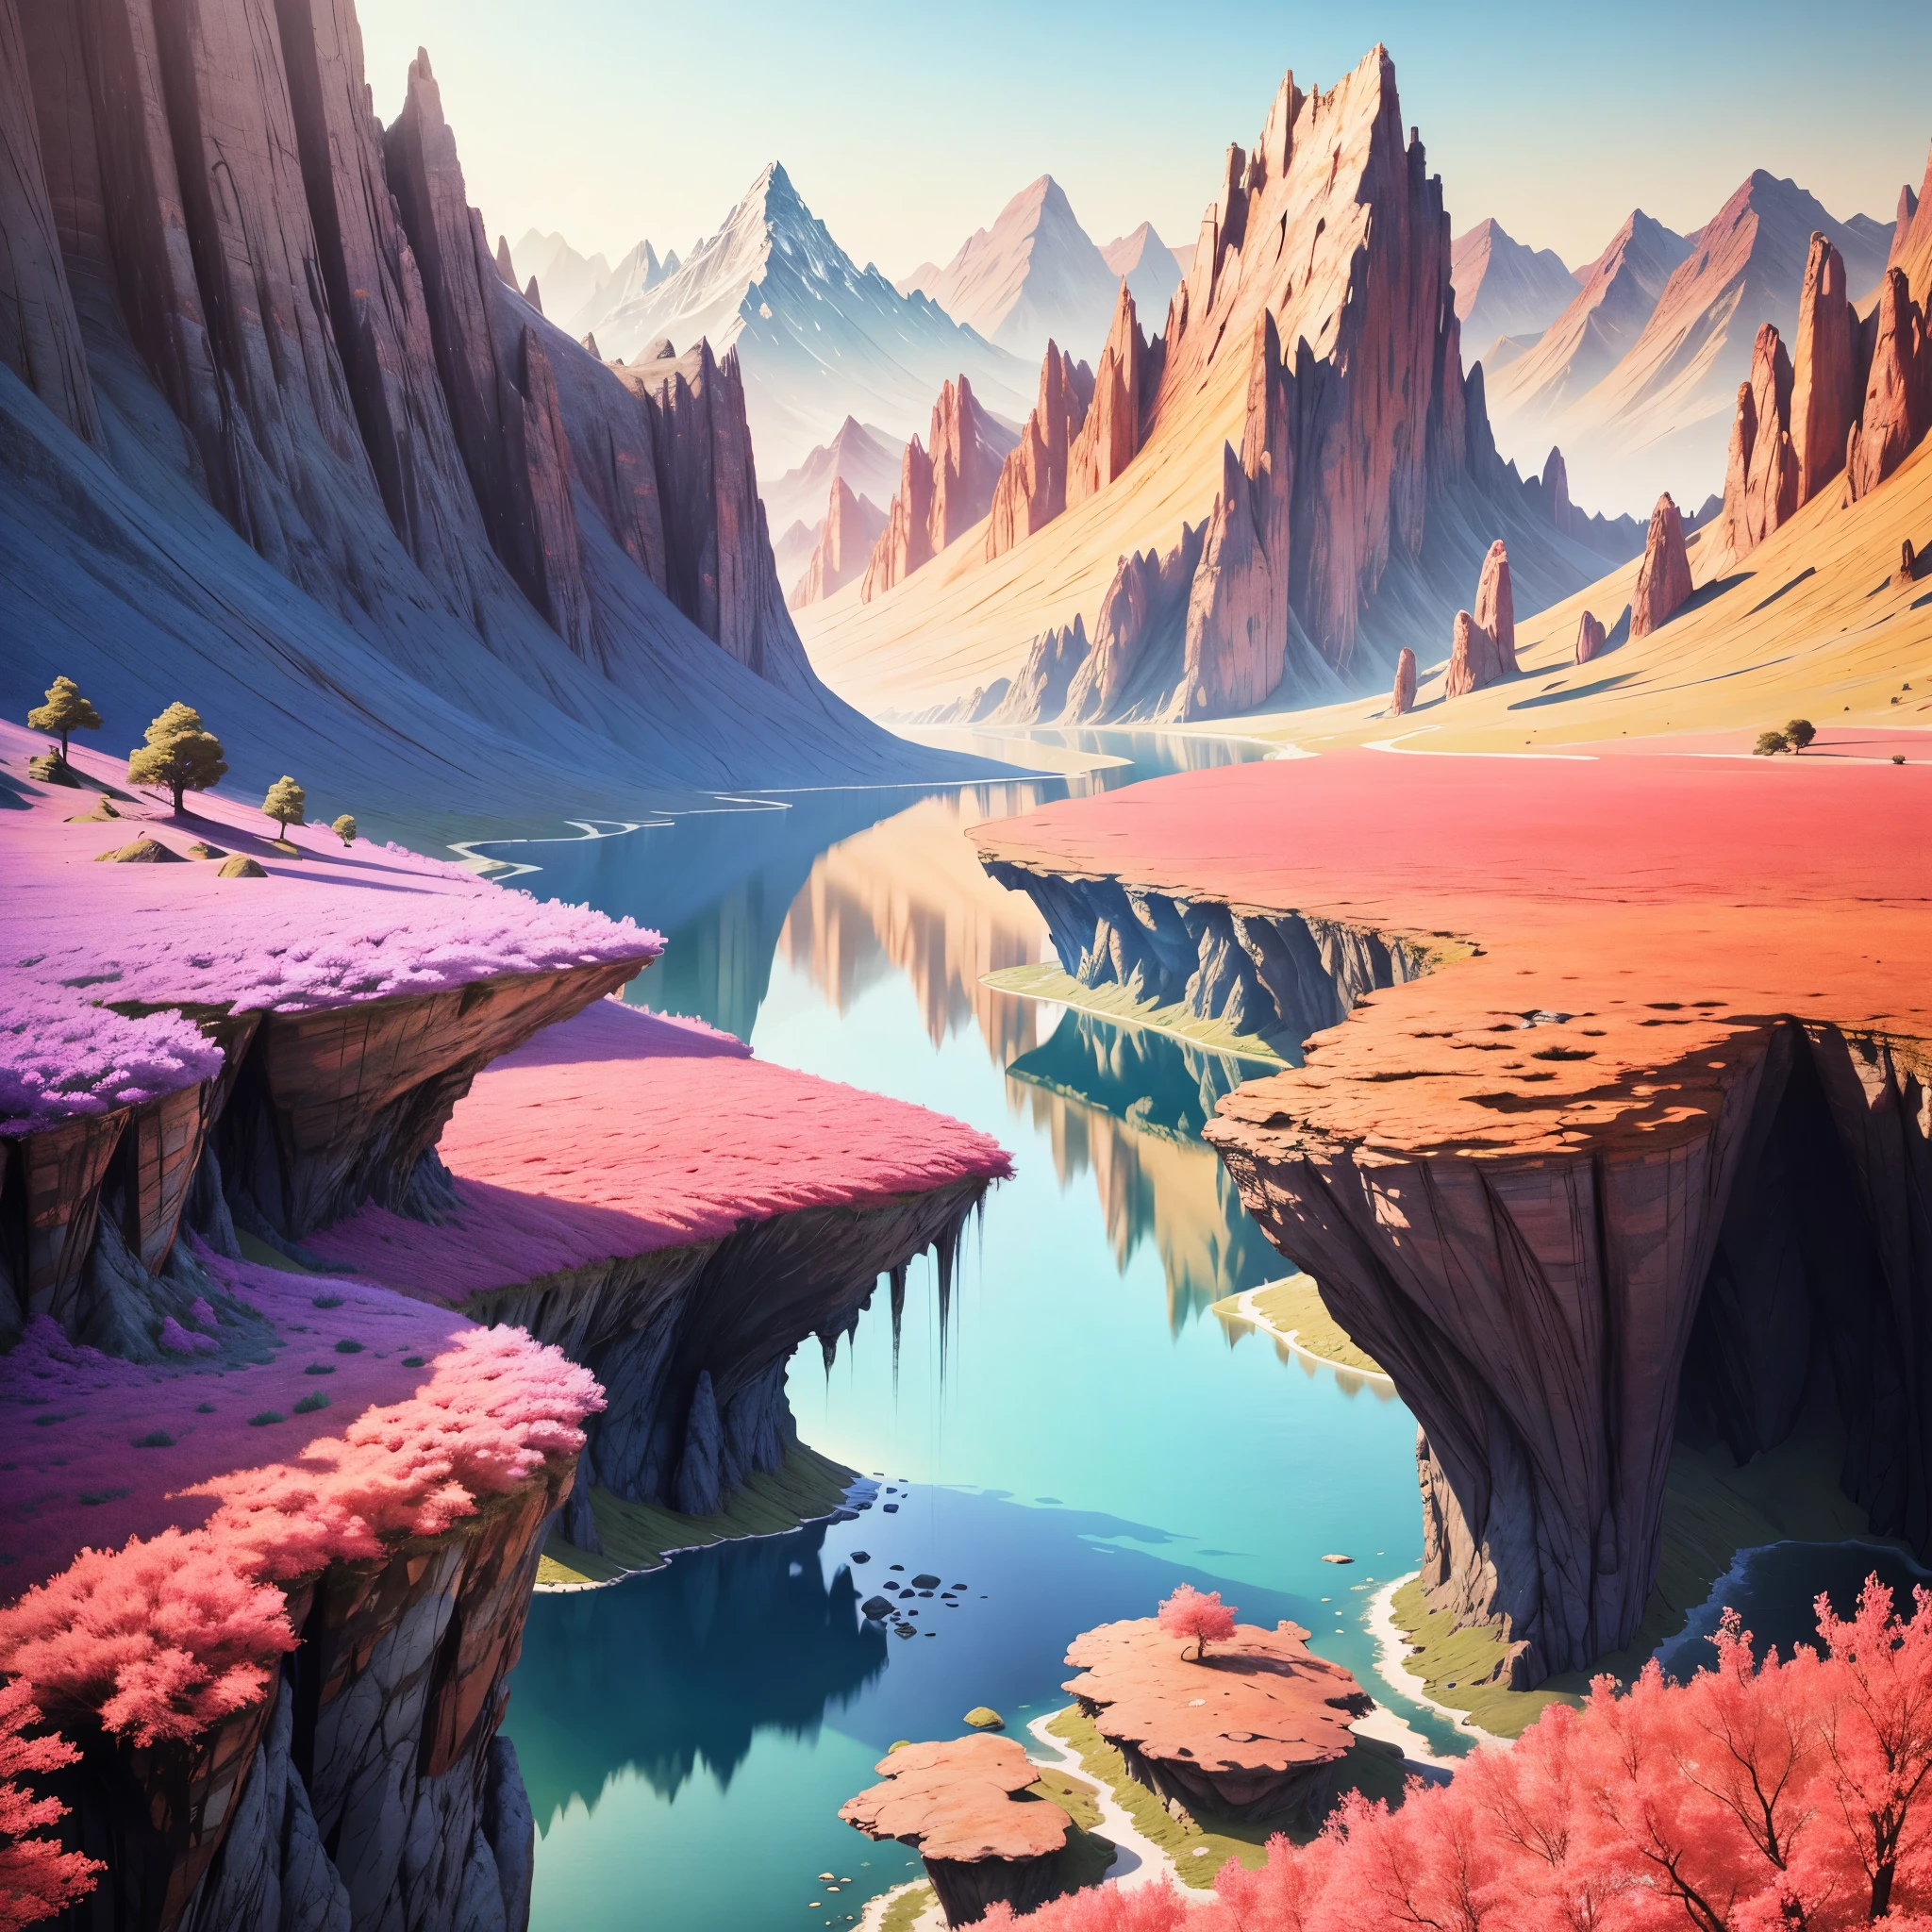 arafed landscape with a lake and a mountain with a intense blue cosmic, a surreal dream landscape, neat line definition, detailed vegetation, surreal landscape, in a surreal dream landscape, 4k highly detailed digital art, impressive fantasy landscape, beautiful alien landscape, beautiful render of a landscape, marc adamus, ethereal landscape, amazing landscape, stunning alien landscape, surreal dream landscape, amazing alien landscape